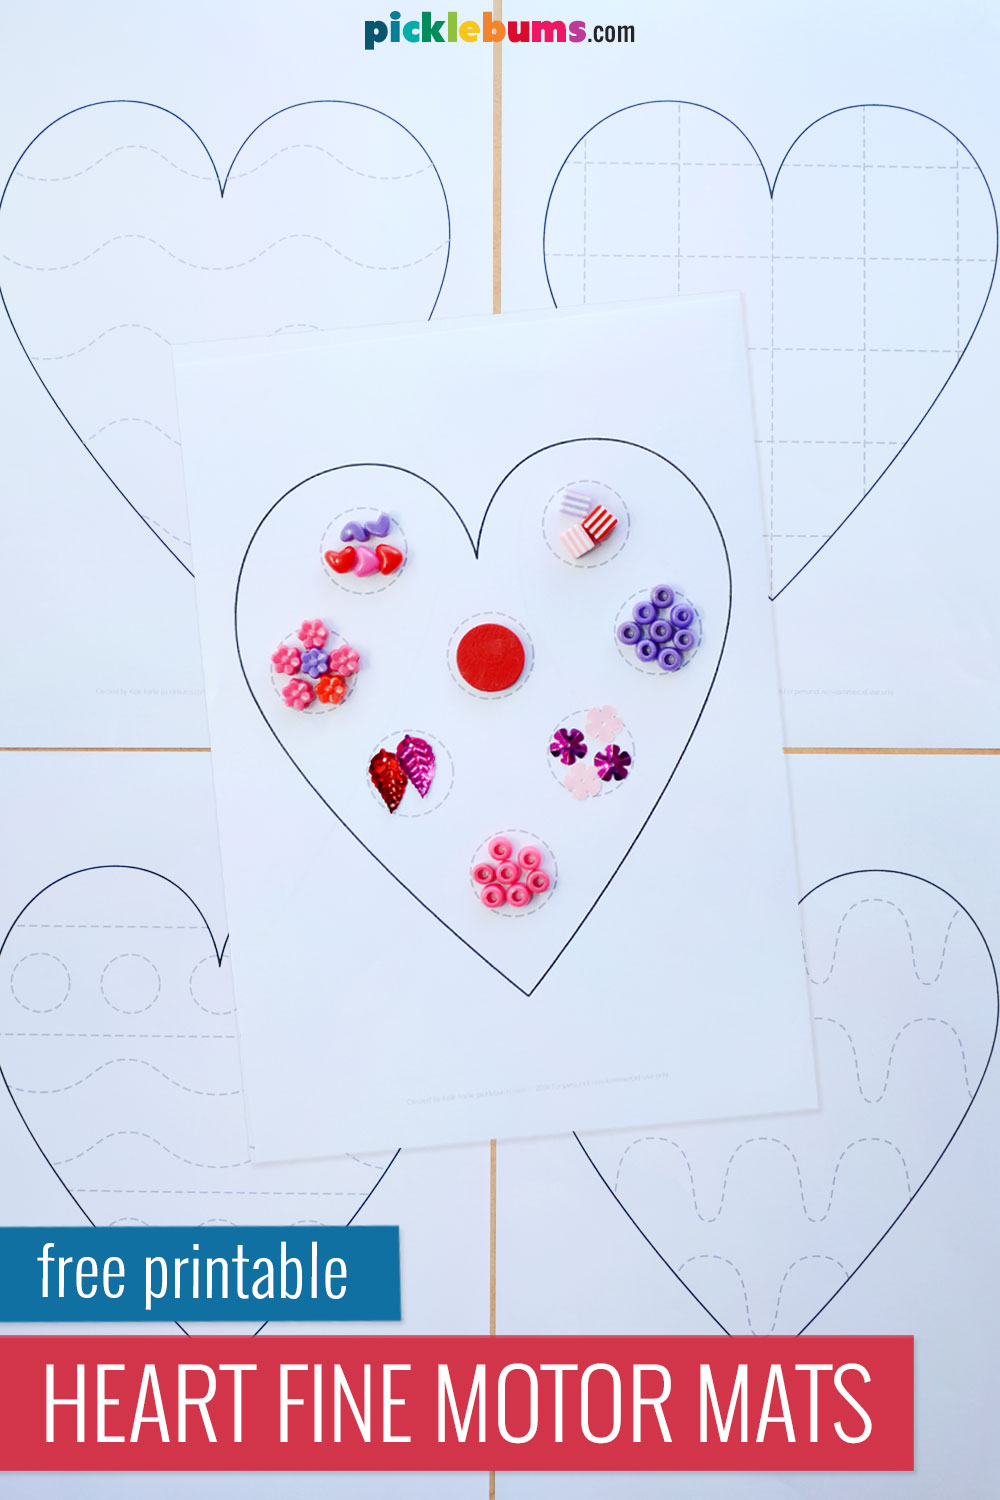 printable heart fine motor mats with loose parts